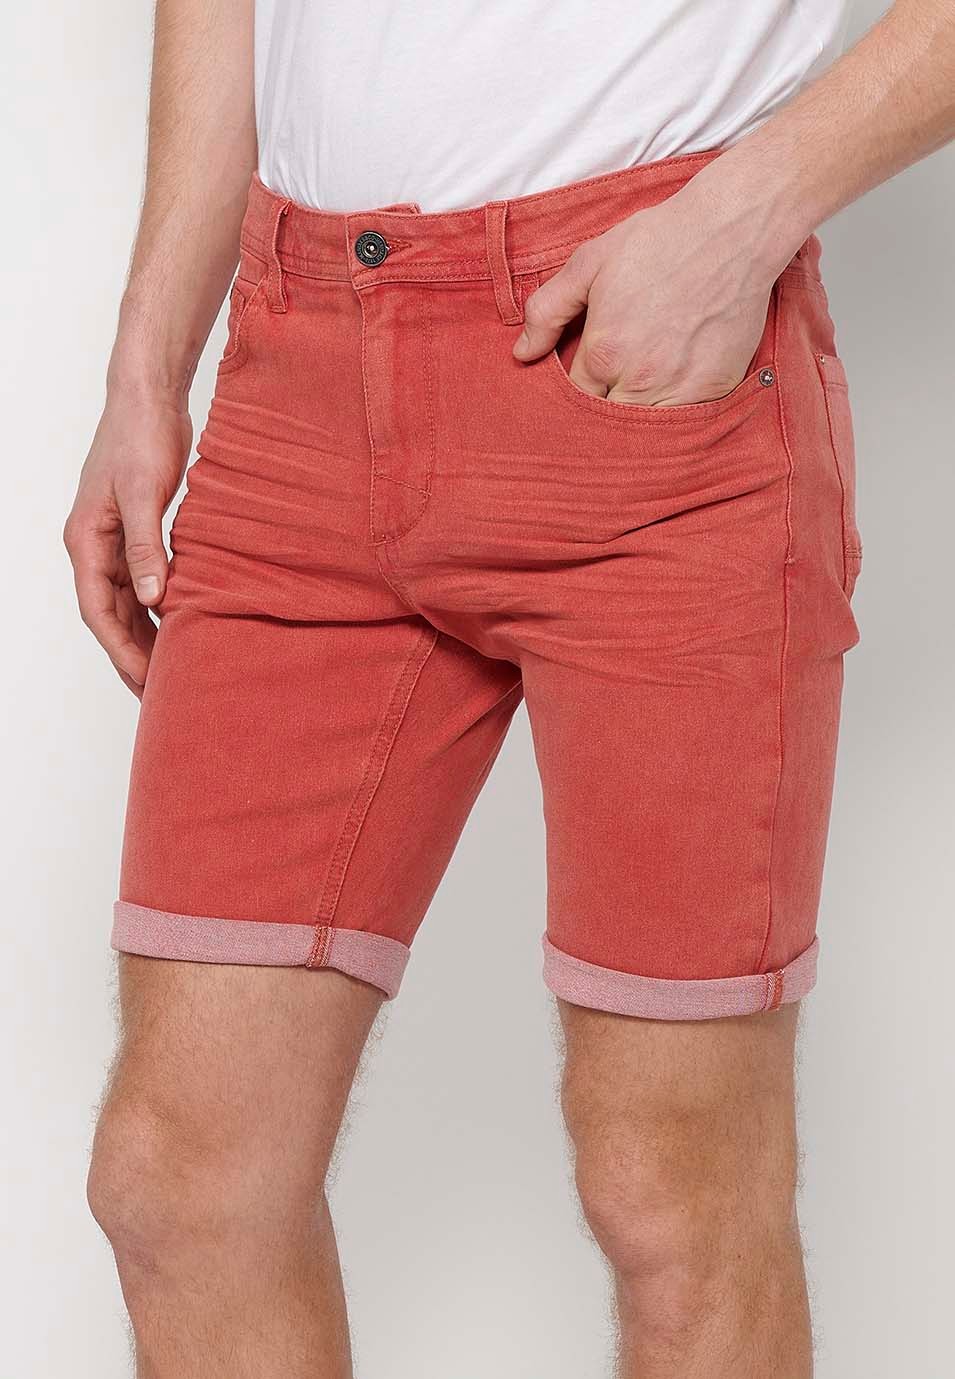 Shorts with a turn-up finish with front zipper and button closure and five pockets, one with a match pocket, in Red for Men 2